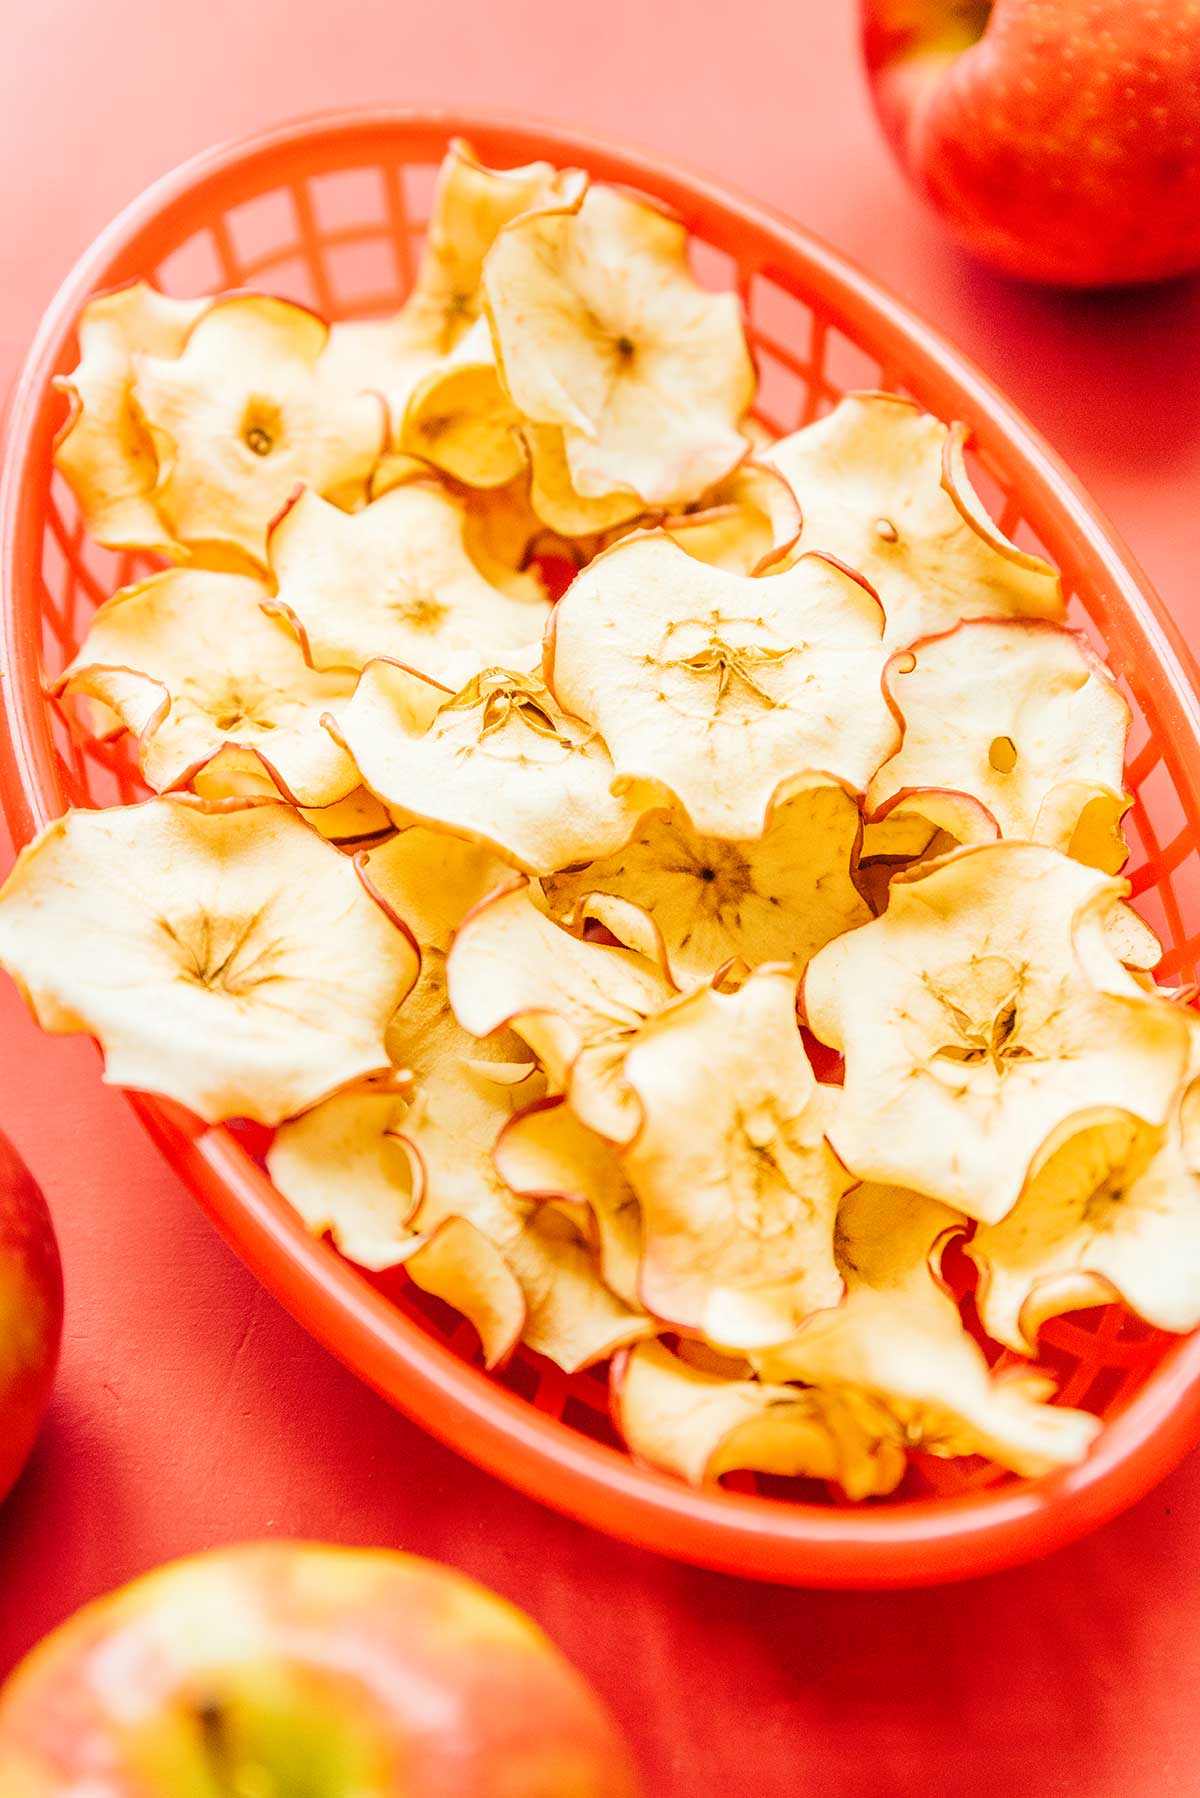 A red basket filled with oven baked apple chips